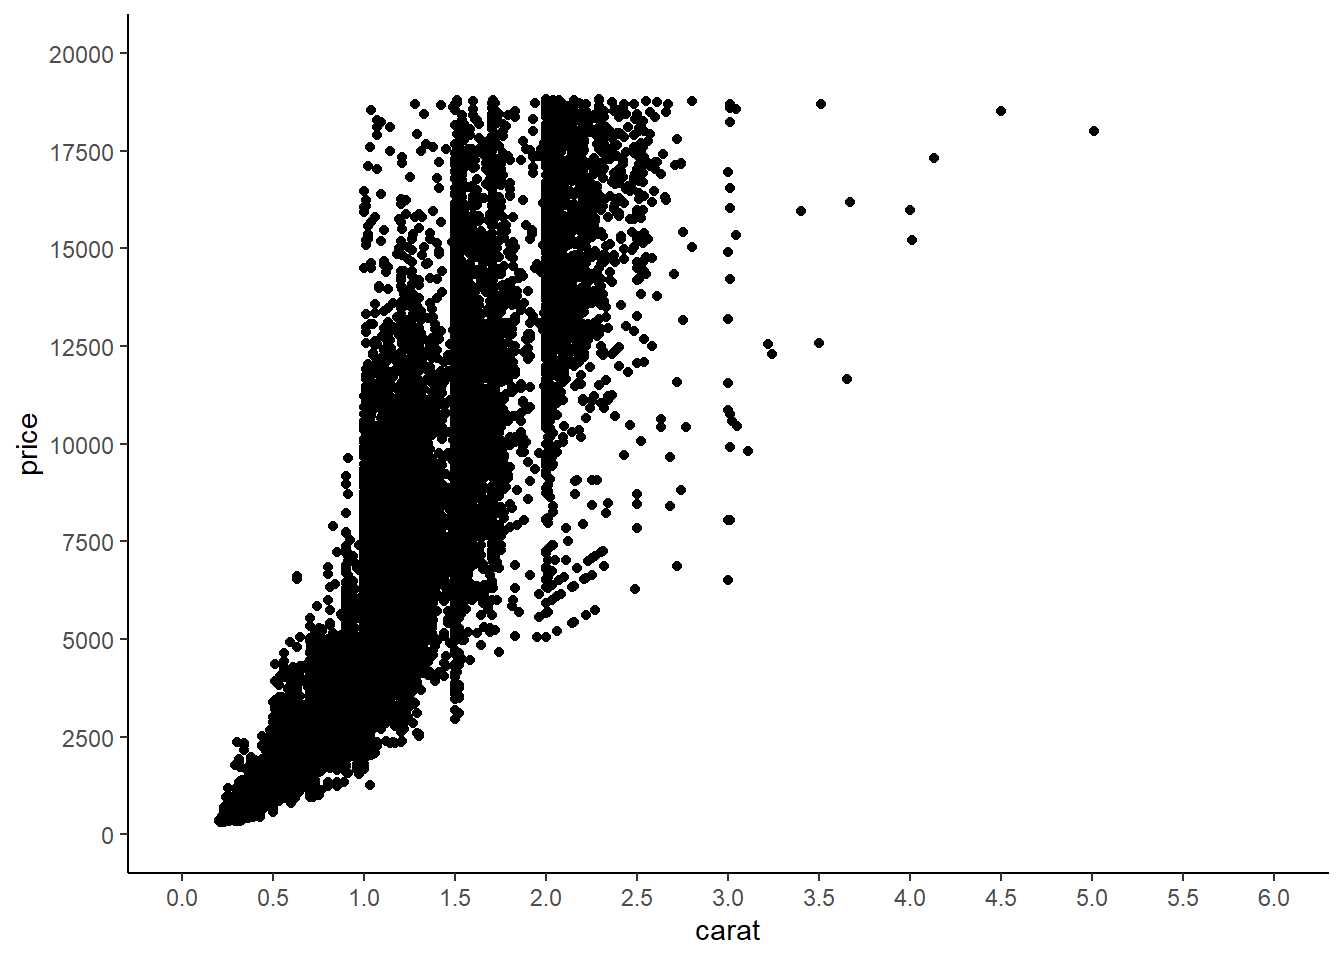 A ggplot object with a geom_point layer, the price of diamonds by their carat, classic theme